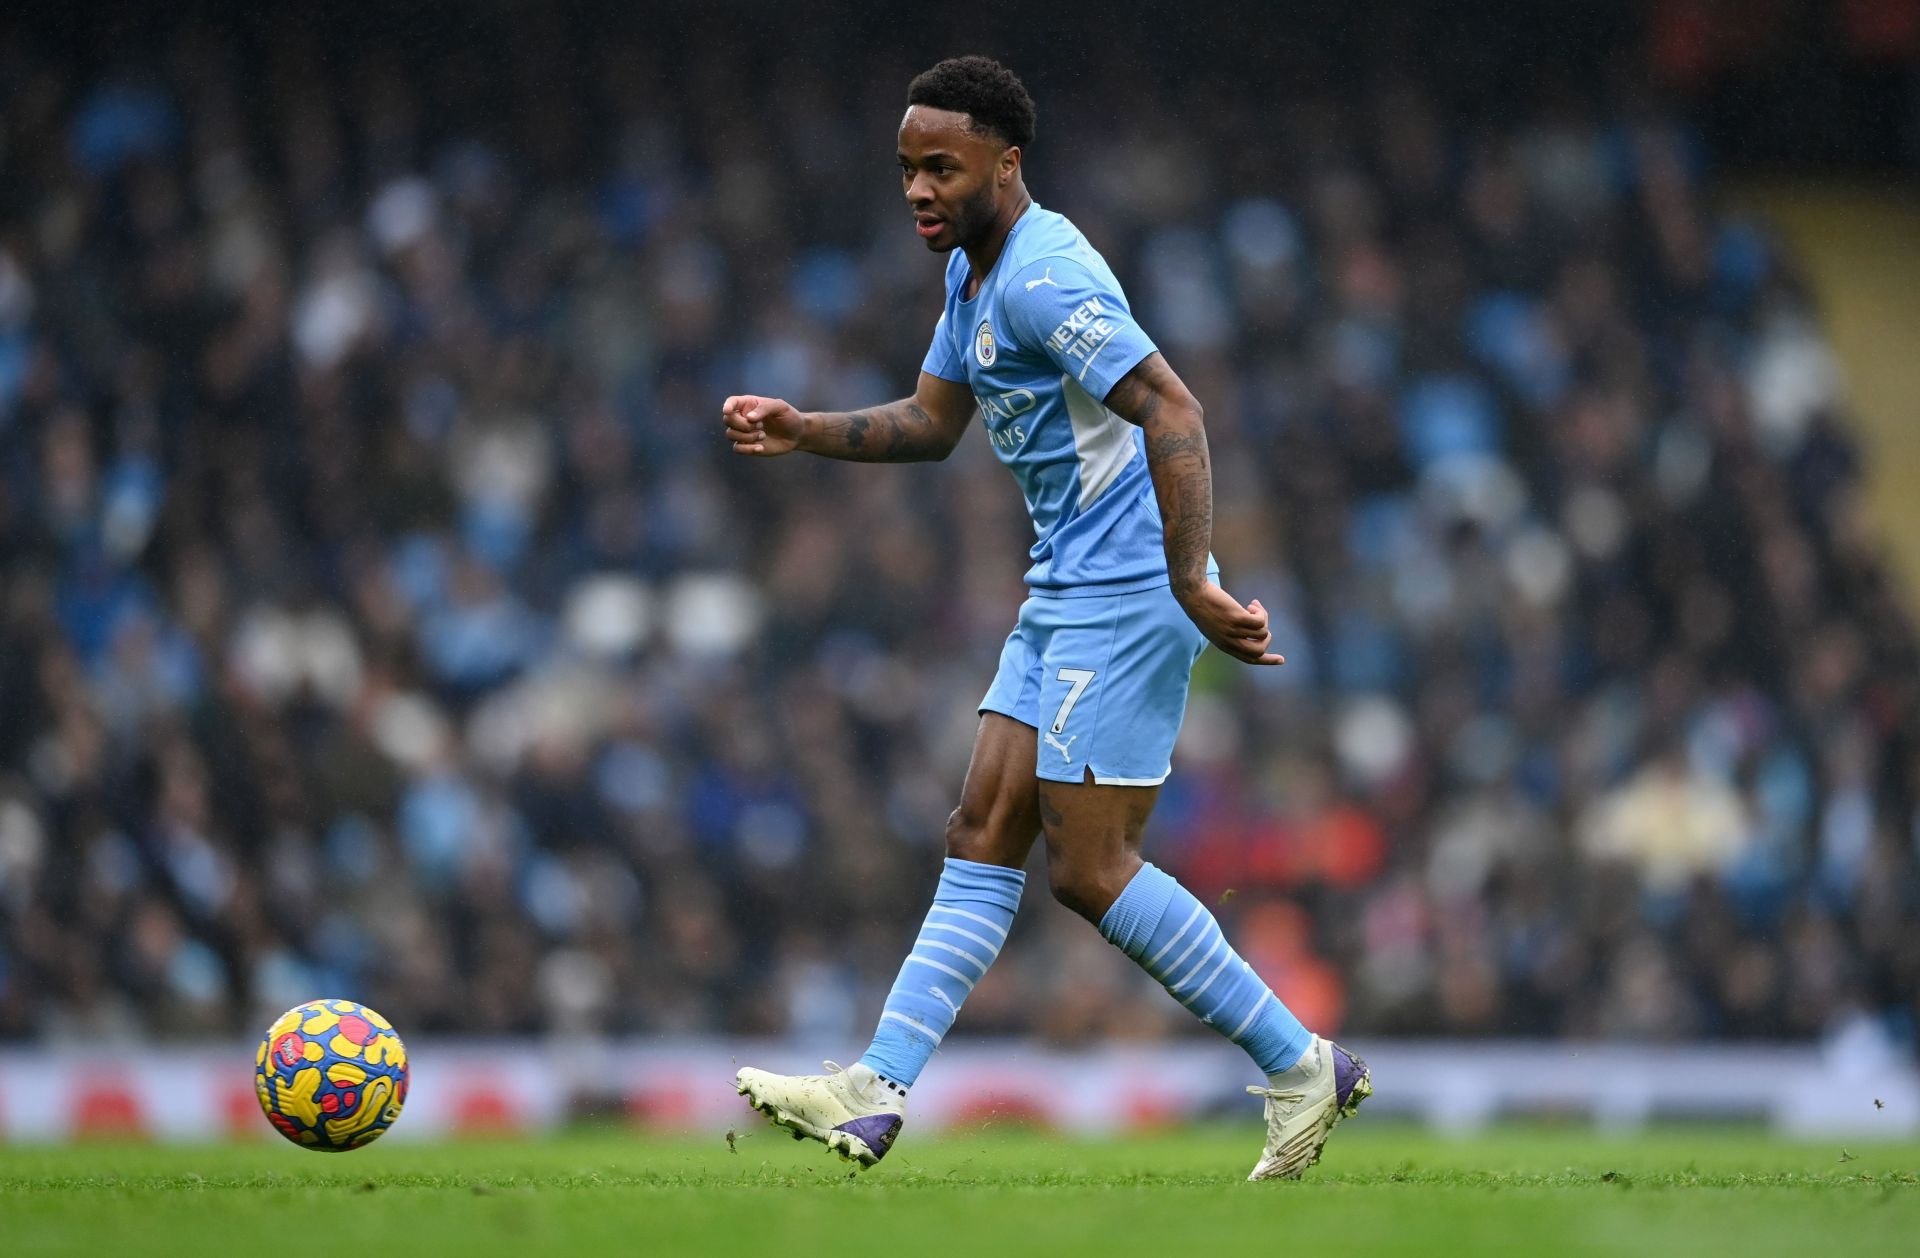 Should Manchester City cash in on Sterling while they can?